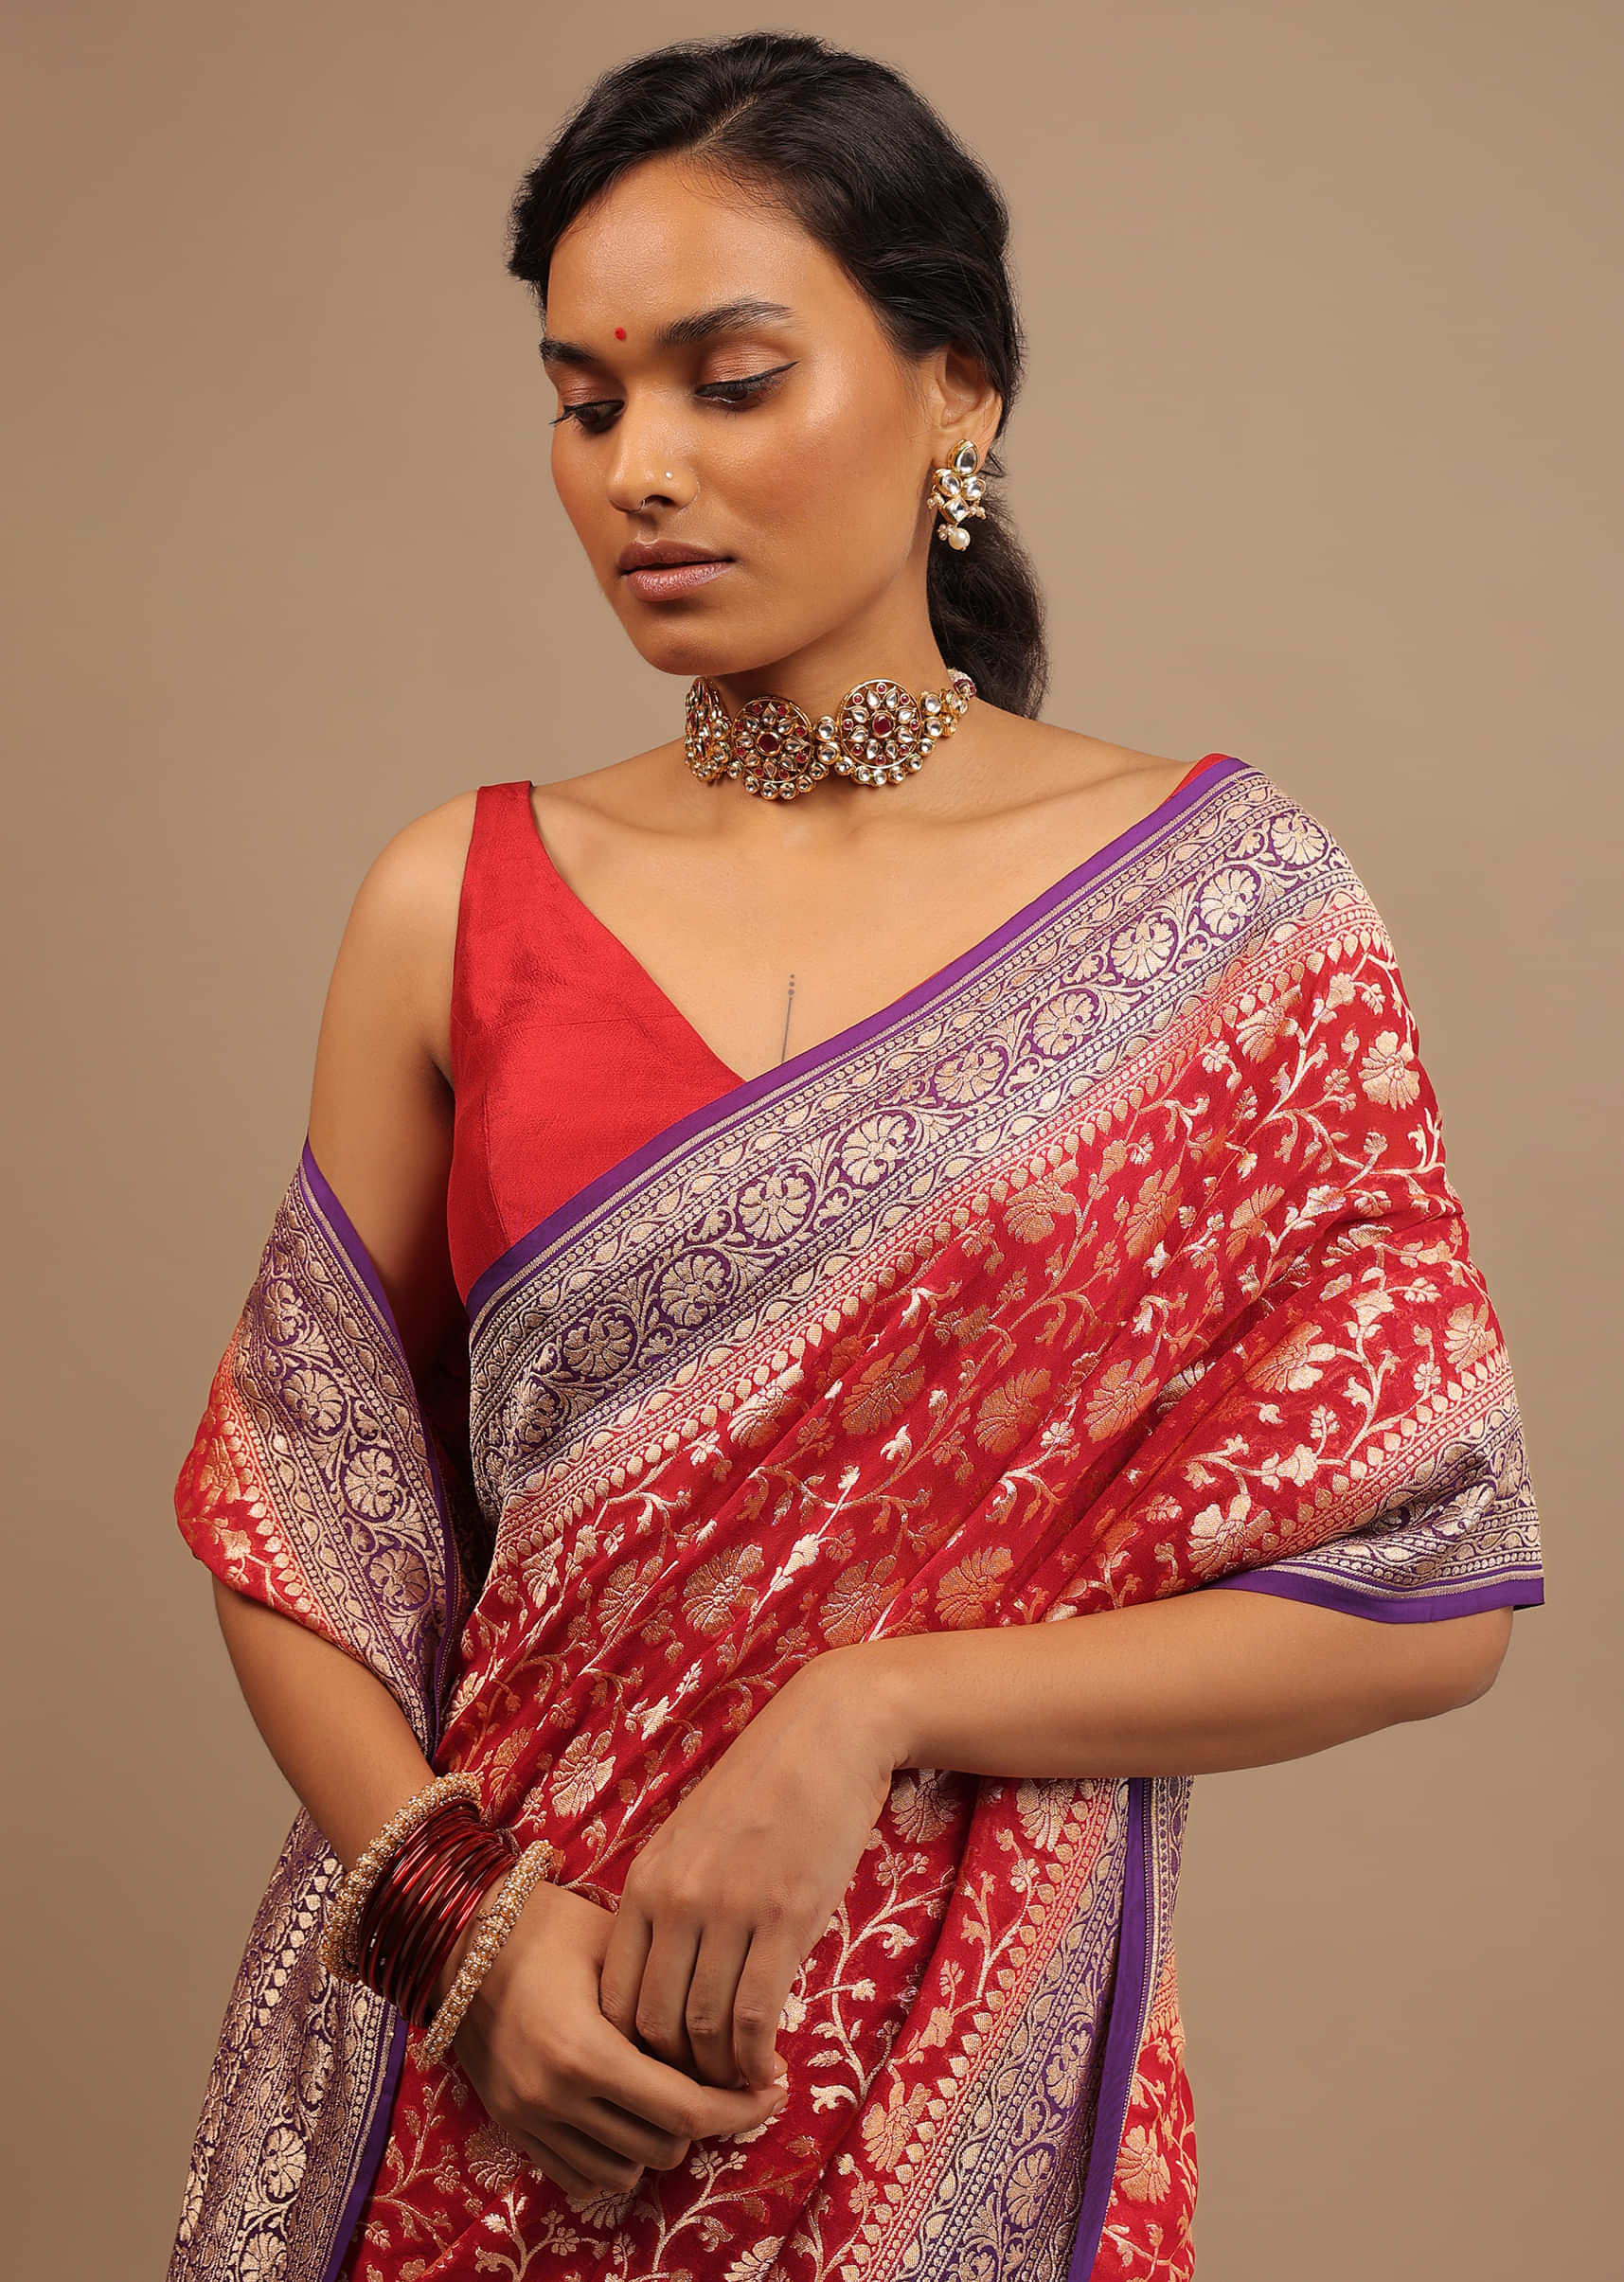 Carmine Red Saree In Georgette With Wine Border And Woven Floral Jaal Work